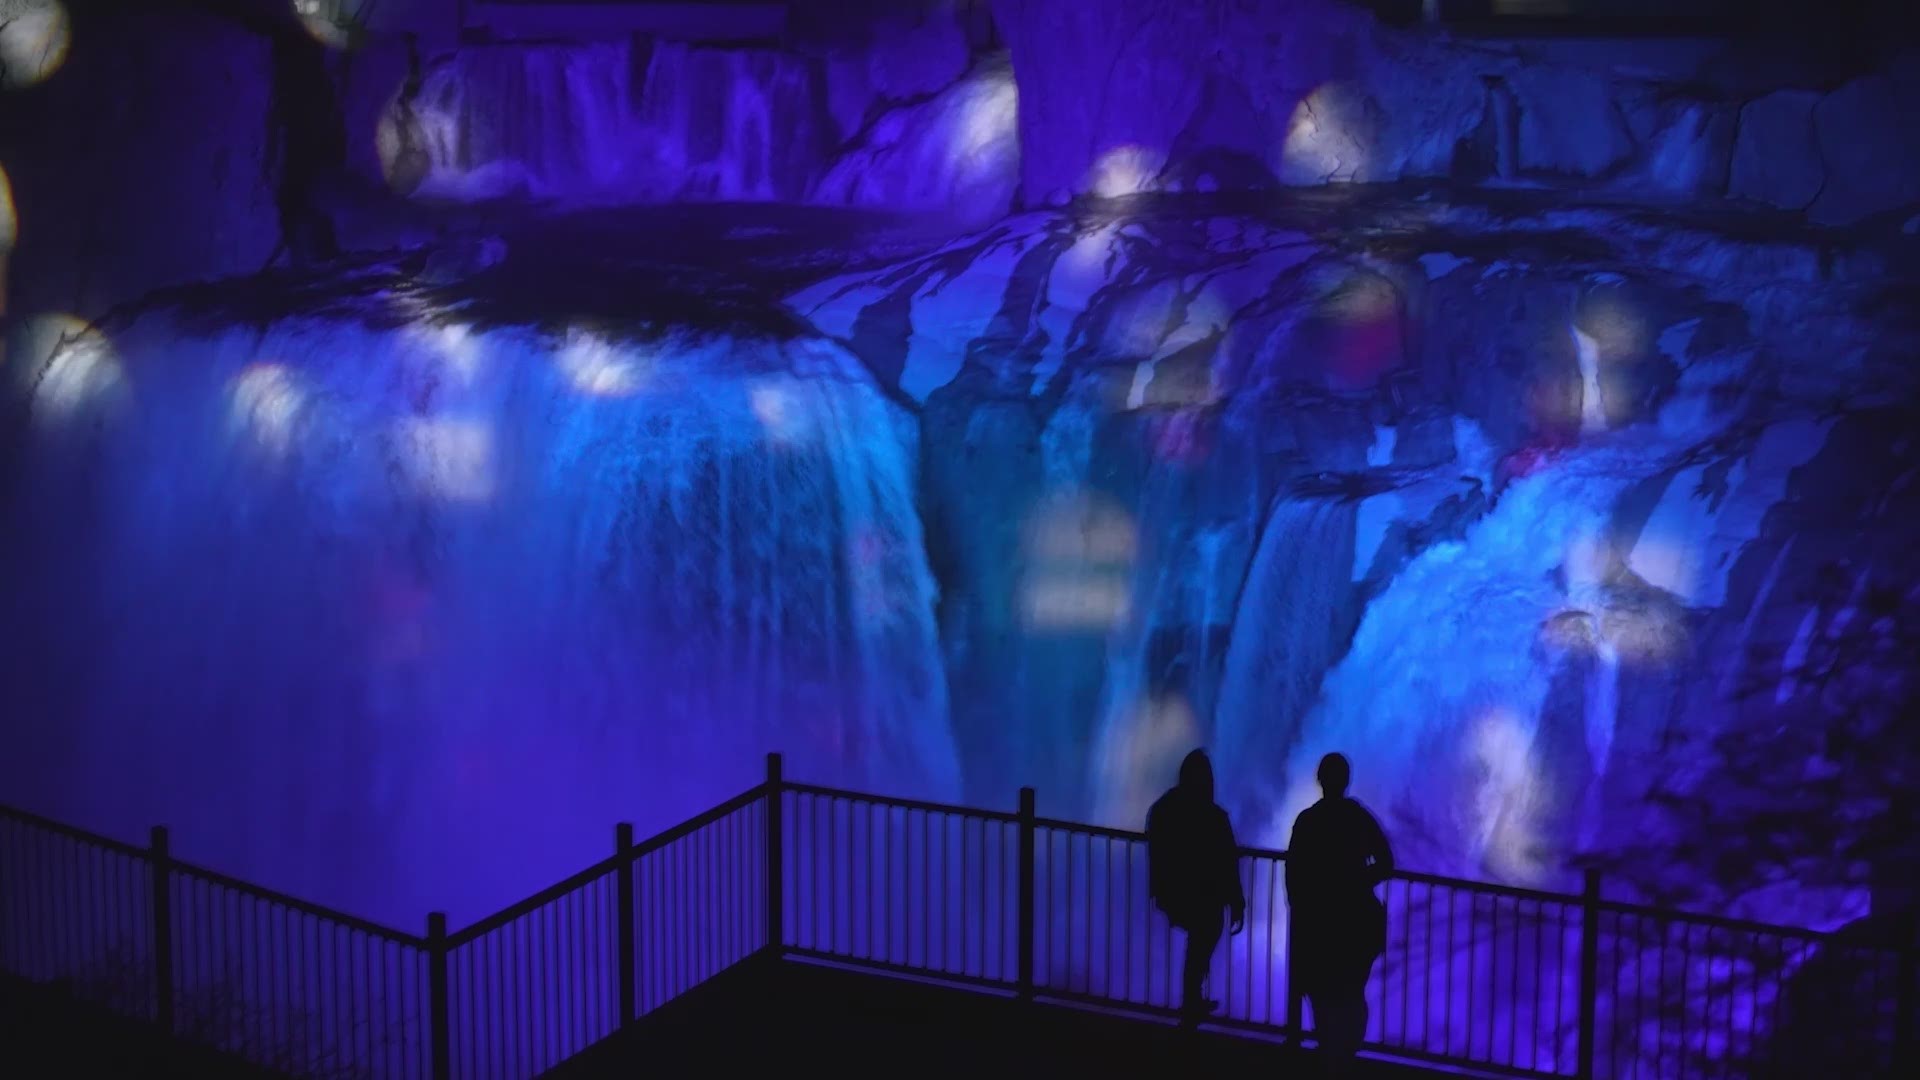 This attraction comes after The Niagara of the West was rated as the top bucket list destination for Idaho by Forbes Magazine.